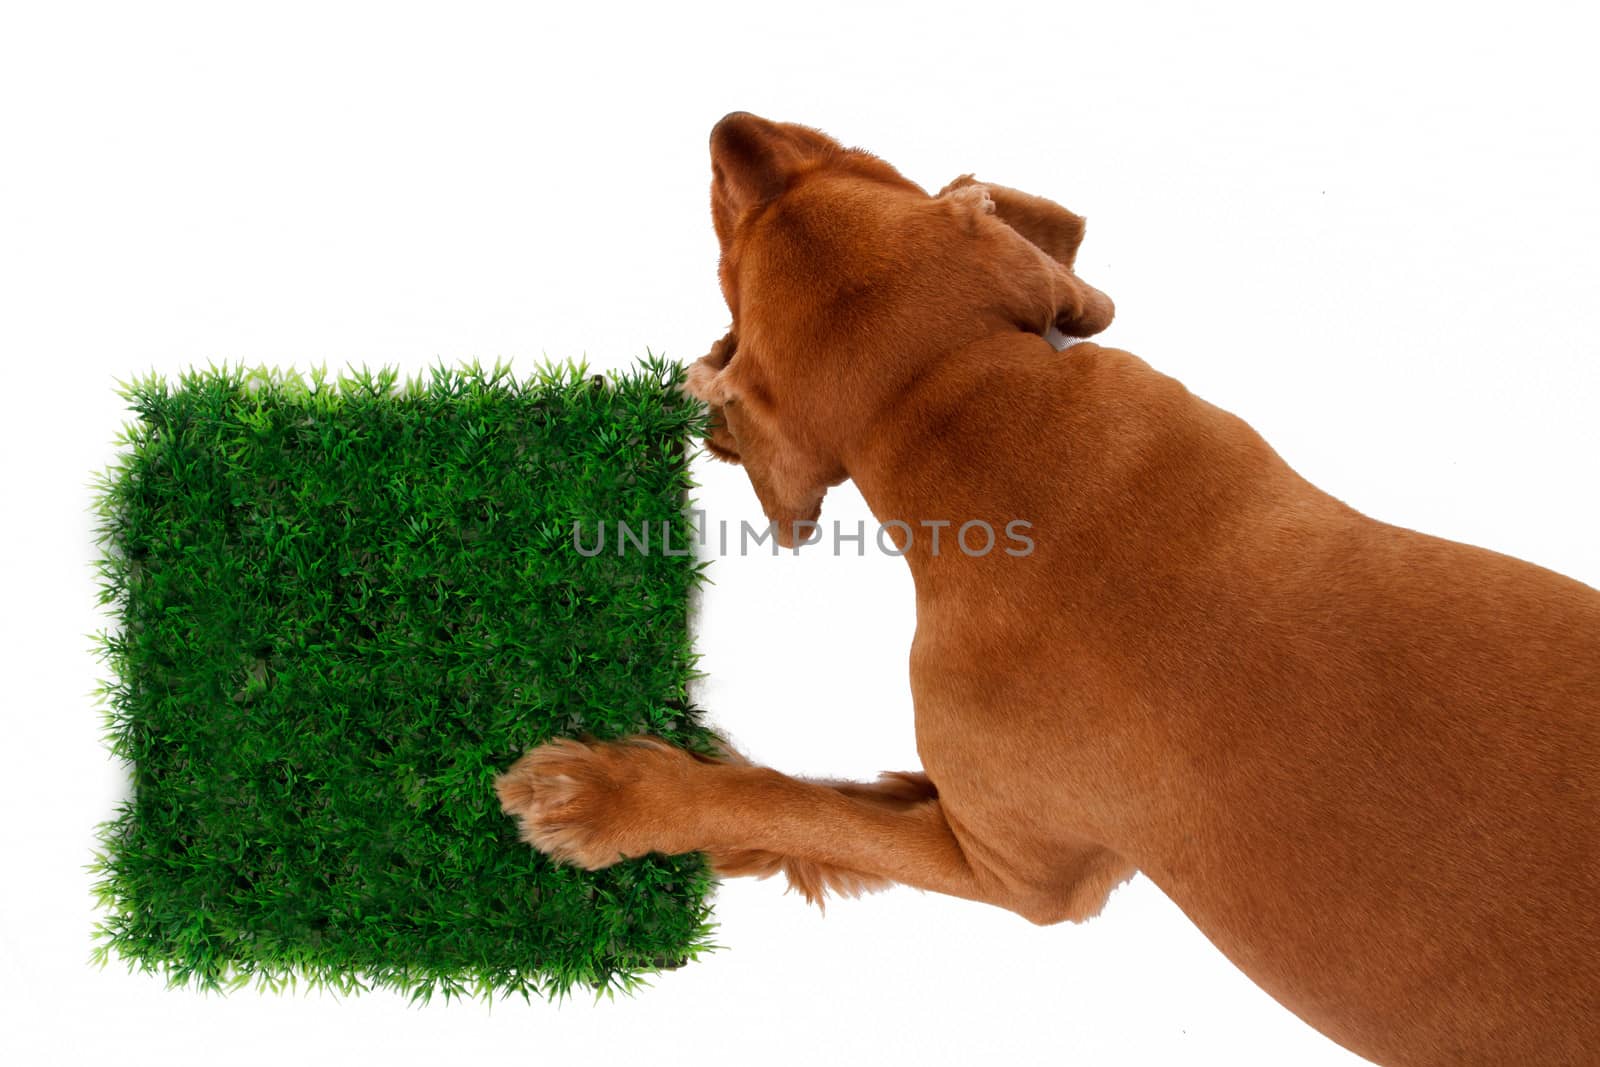 English cocker spaniel dog and grass, isolated on white background.